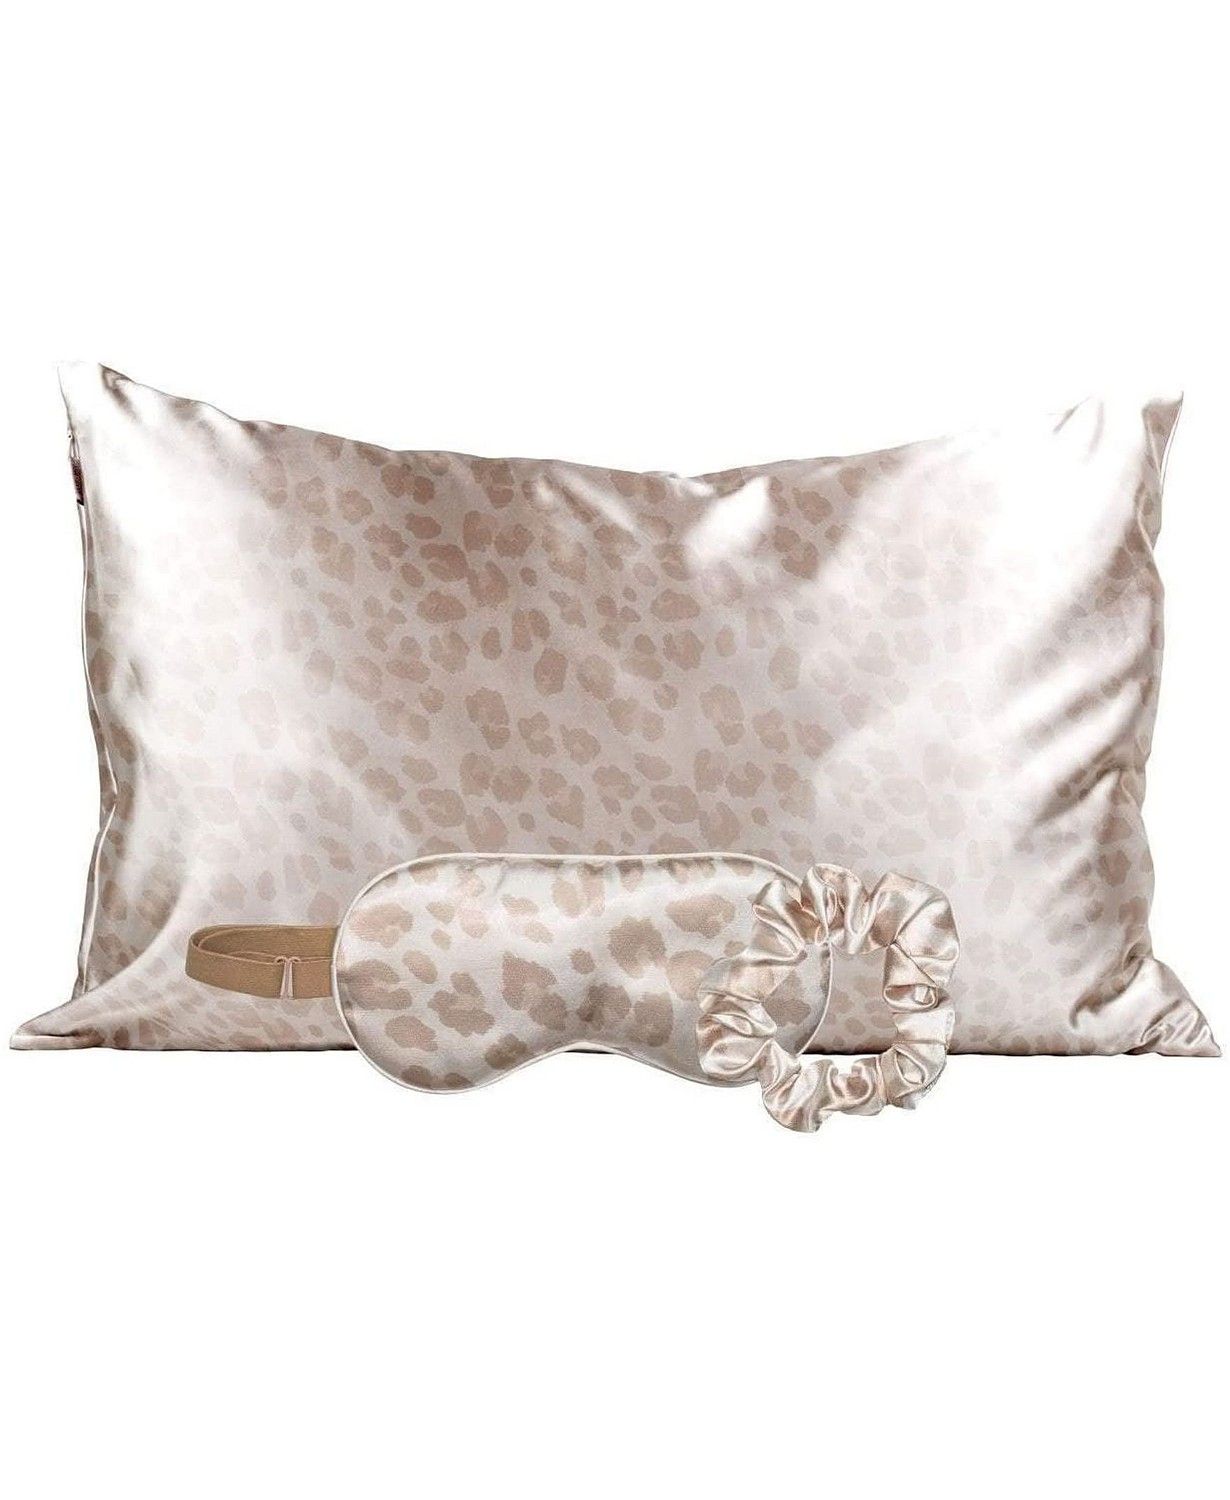 Kitsch Satin Sleep 3pc Gift Set with Pillowcase, Eye Mask, and Scrunchie & Reviews - Unique Gifts... | Macys (US)